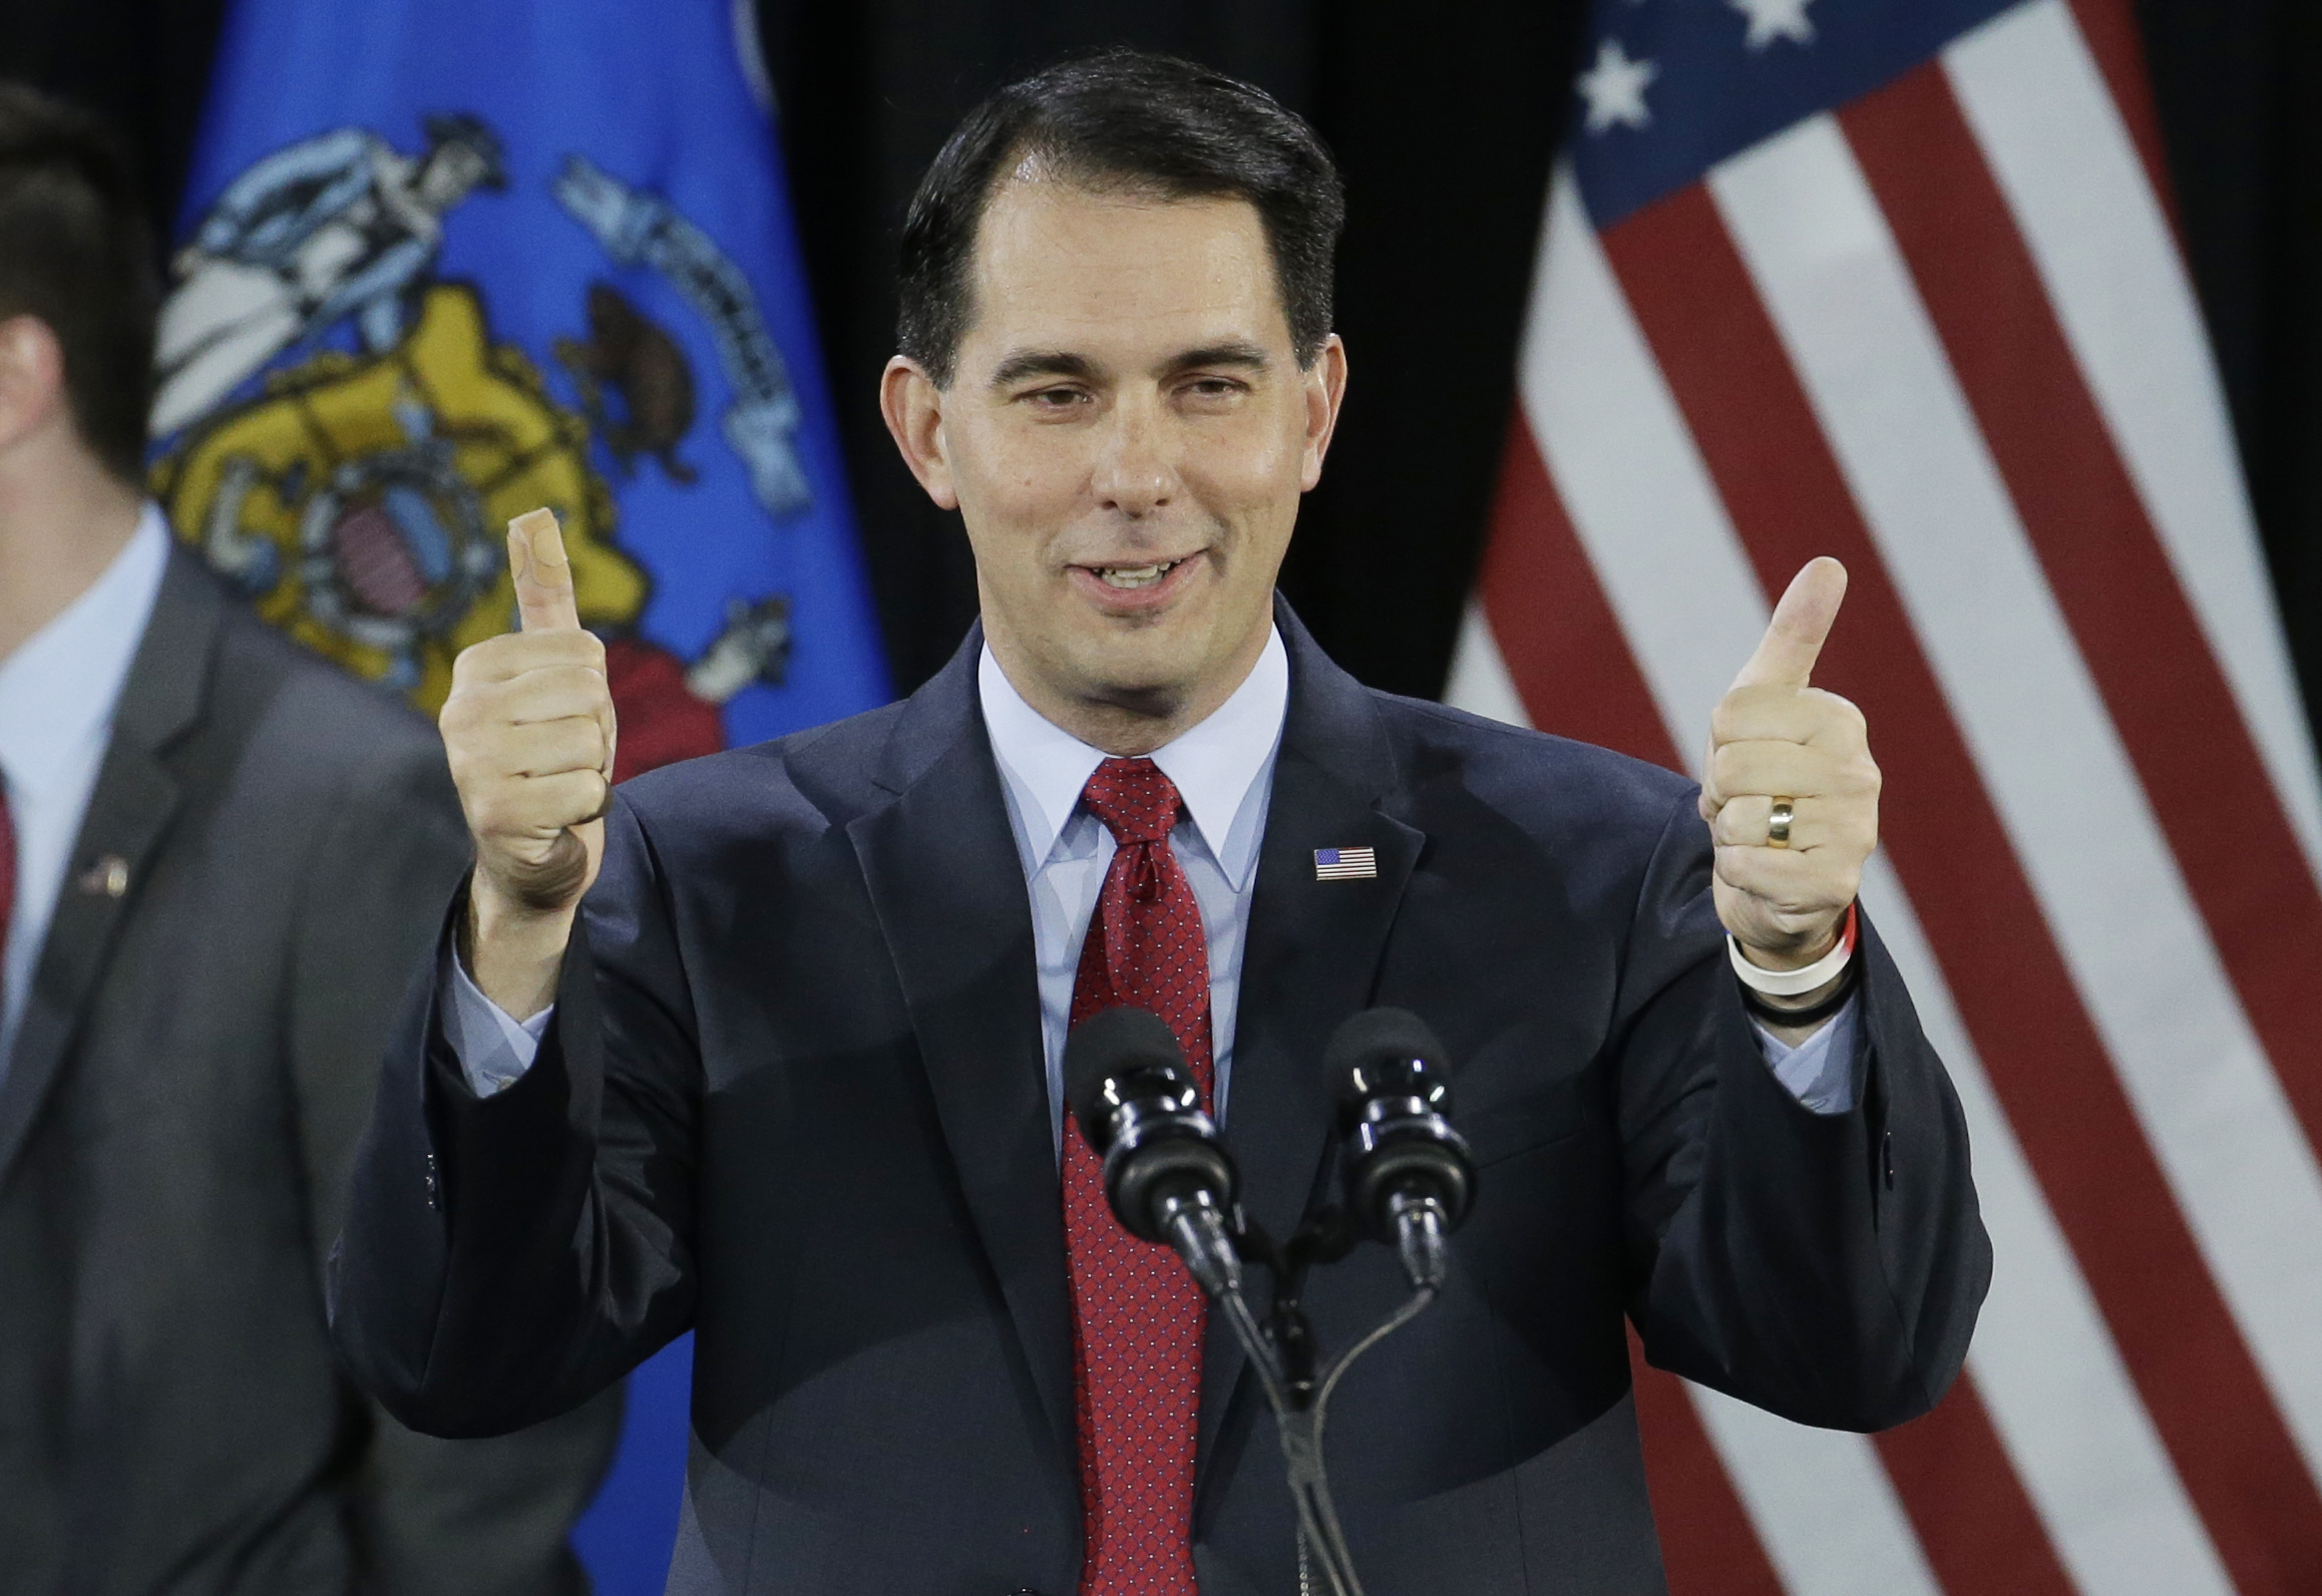 PHOTO: Wisconsin Republican Gov. Scott Walker gives a thumbs up as he speaks at his campaign party, Nov. 4, 2014, in West Allis, Wis. Walker defeated Democratic gubernatorial challenger Mary Burke.